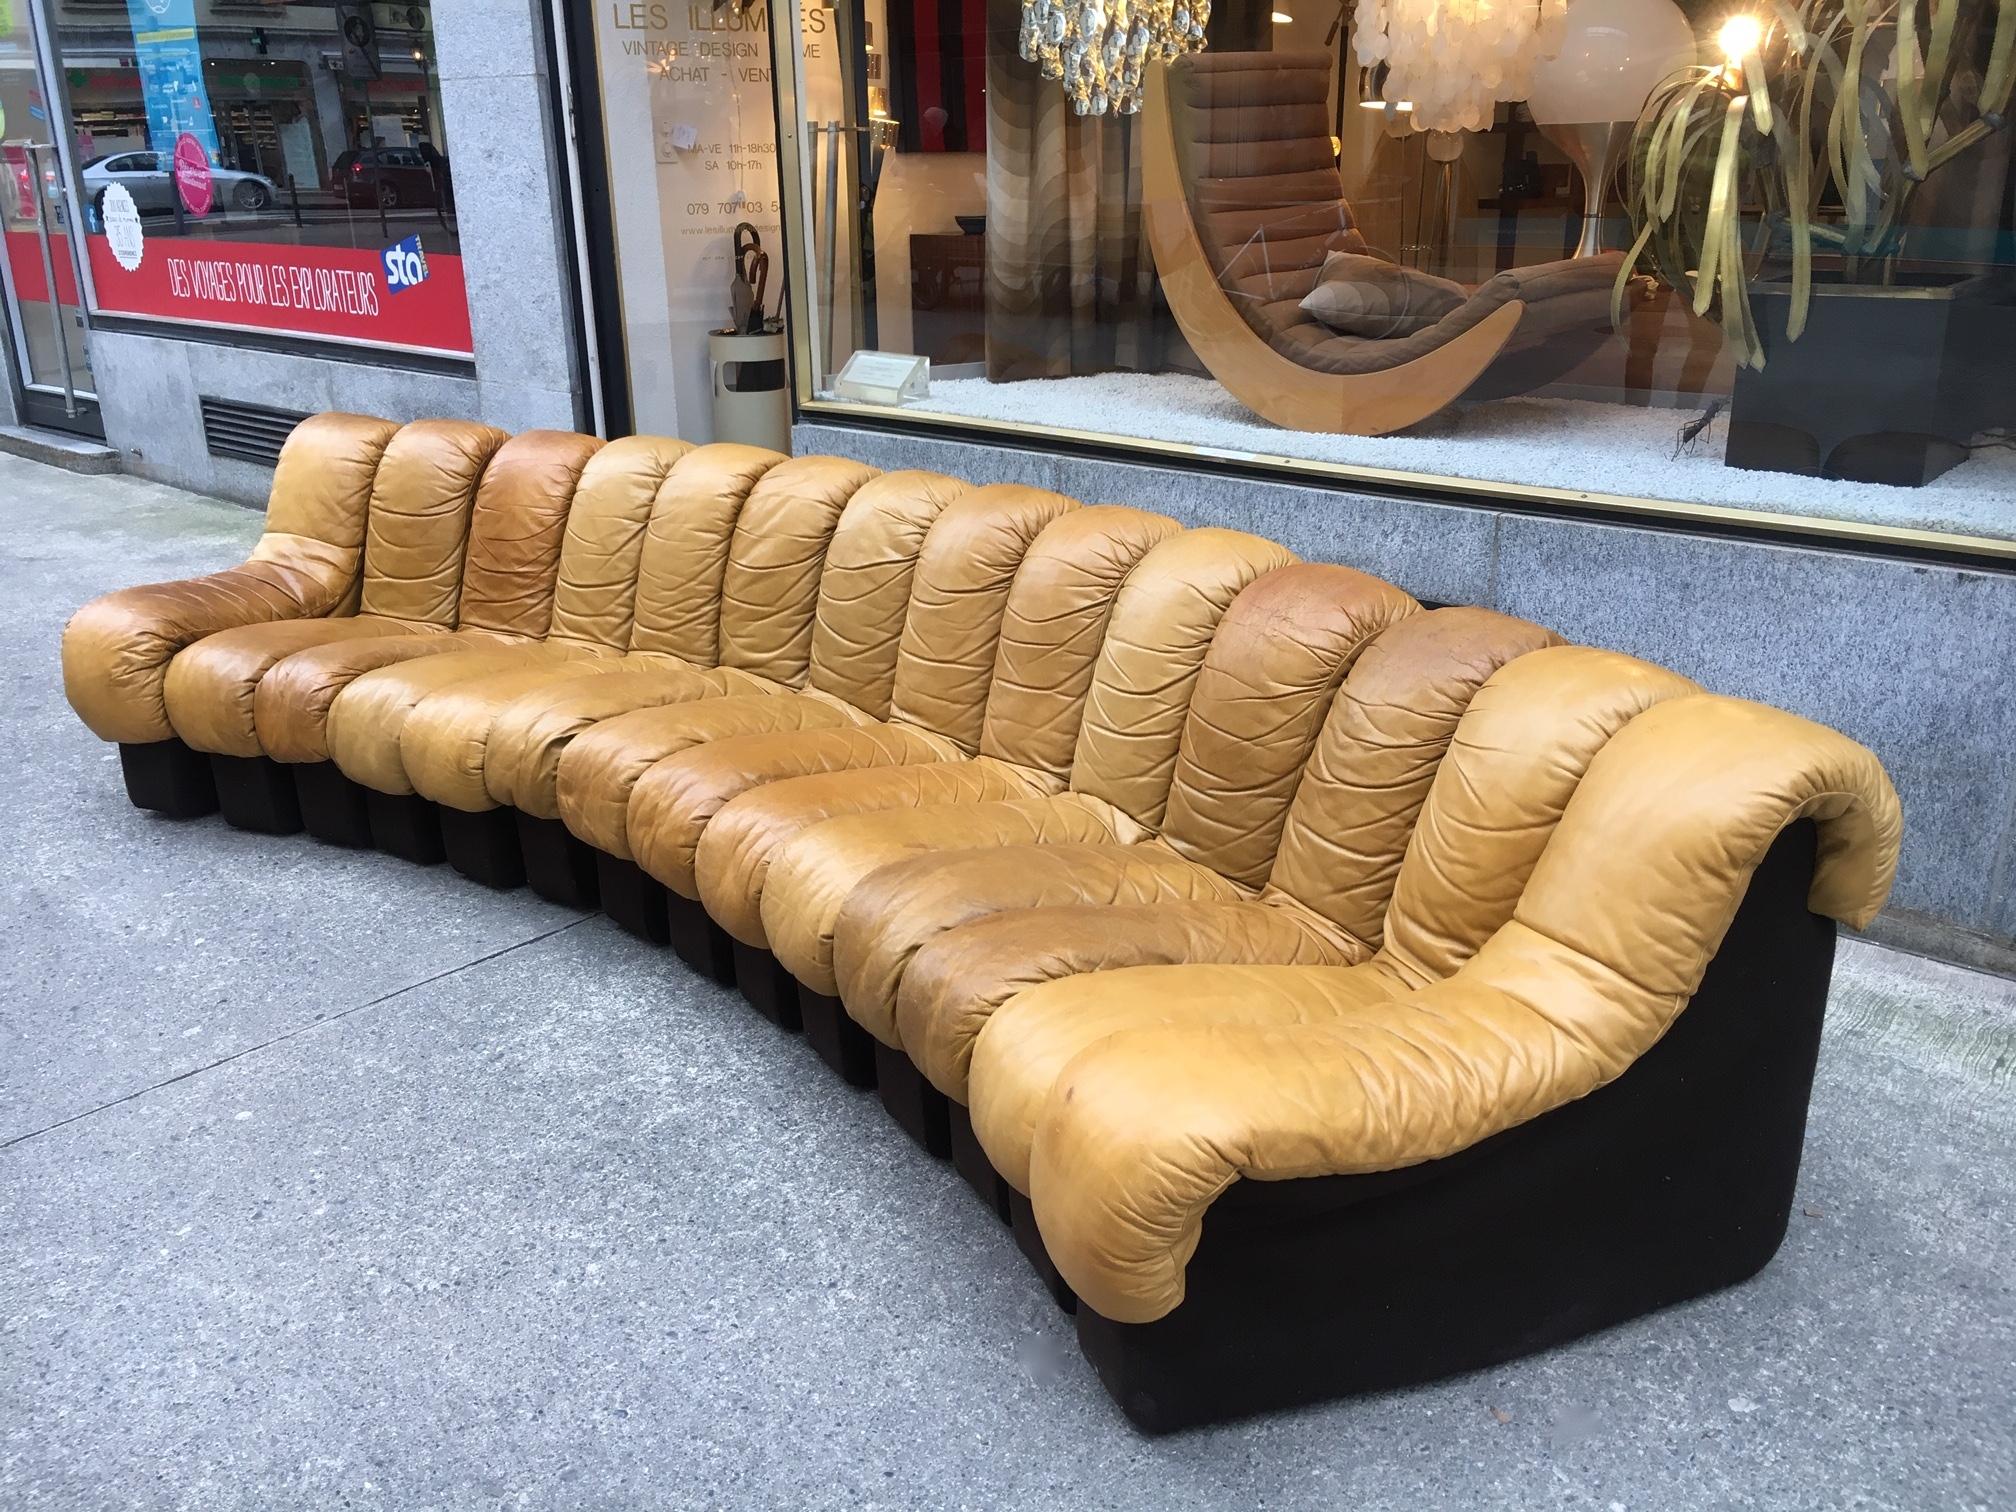 DS600 patinated cognac leather sofa, 14 sections (350cm)
Ueli Berger, Klaus Vogt, Eleanore Peduzzi-Riva and Heinz Ulrich produced by De Sede, Switzerland, circa 1970
Each sections is zipped to the other, the sofa is articulated, you can choose the